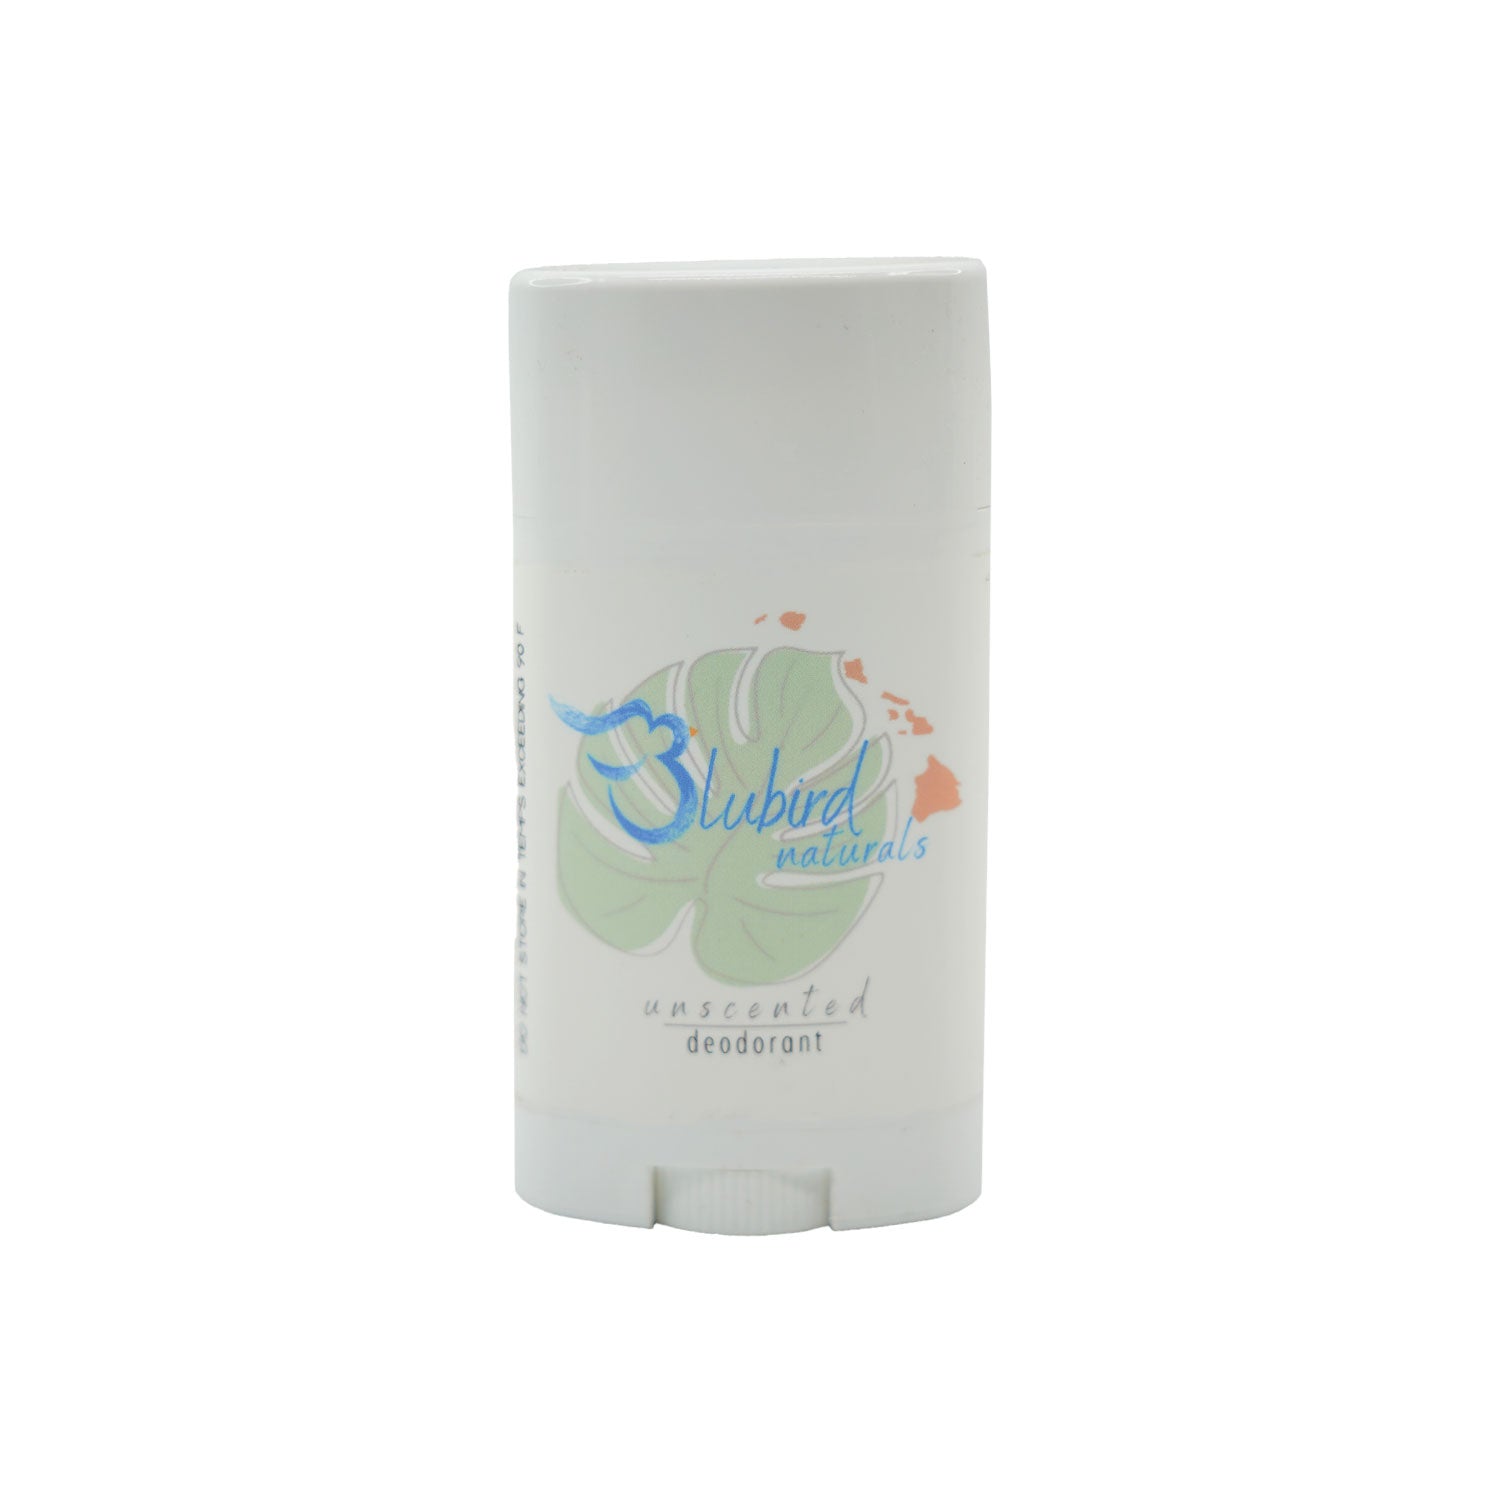 Unscented All Natural Deodorant 2.65 oz